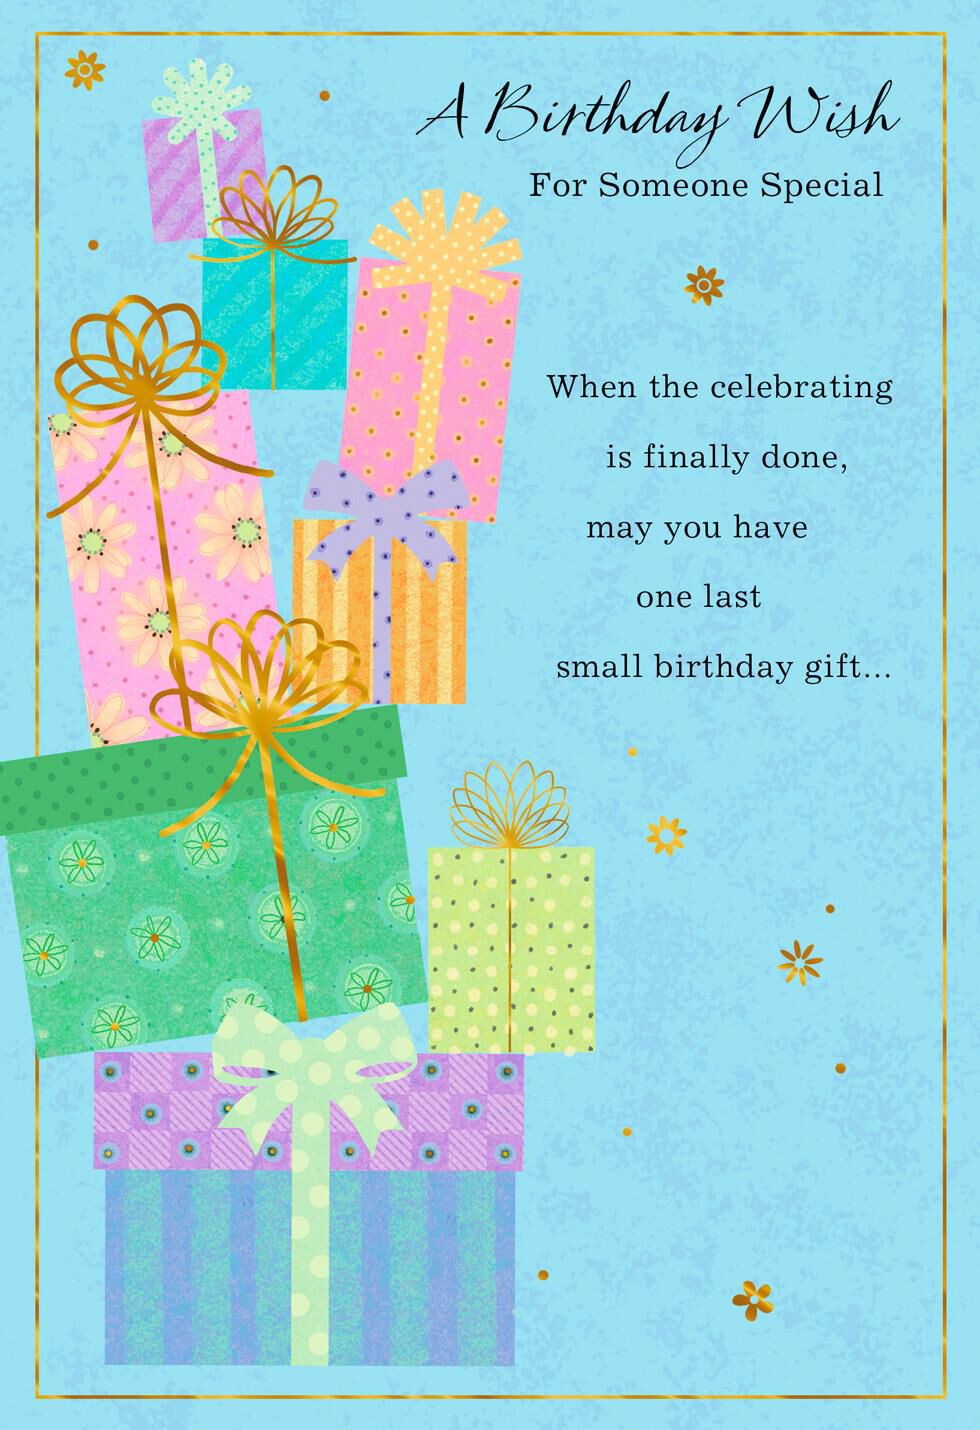 Stack of Gifts on Blue Birthday Card - Greeting Cards - Hallmark